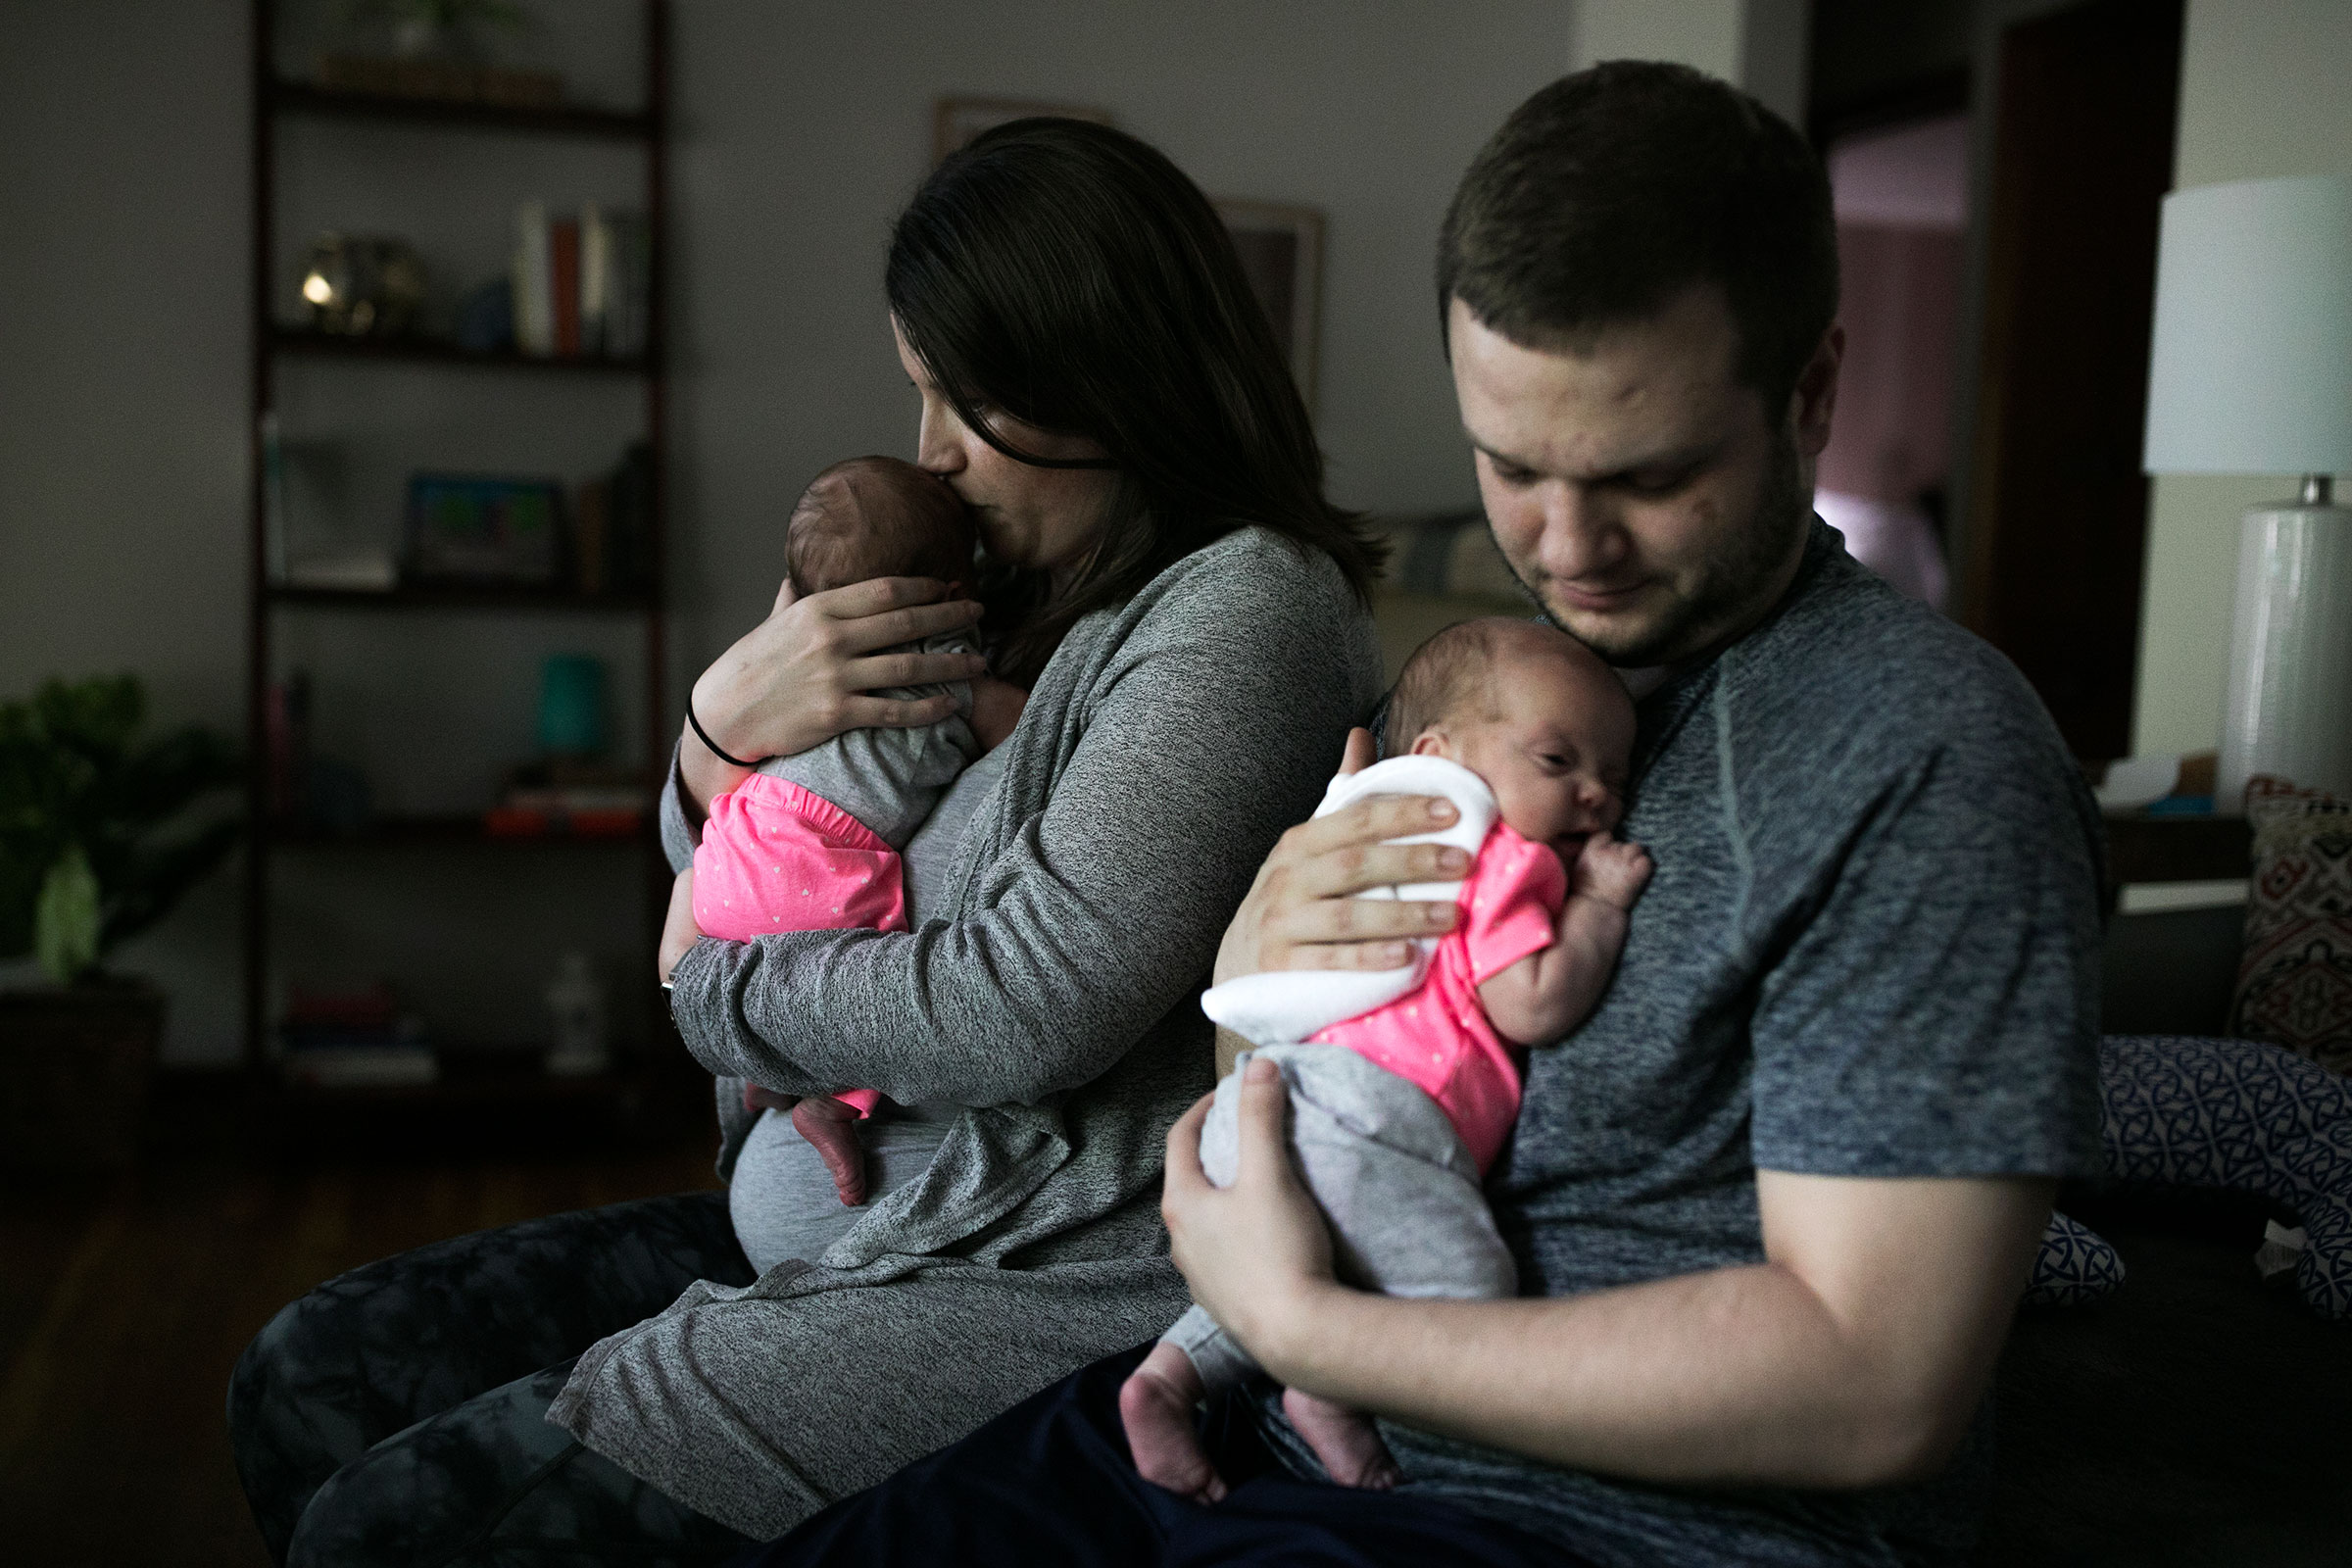 Morgan Lyles and her fiancé Chris comfort 10-week-old twins Maura and Lena in their Columbus, Ohio, home